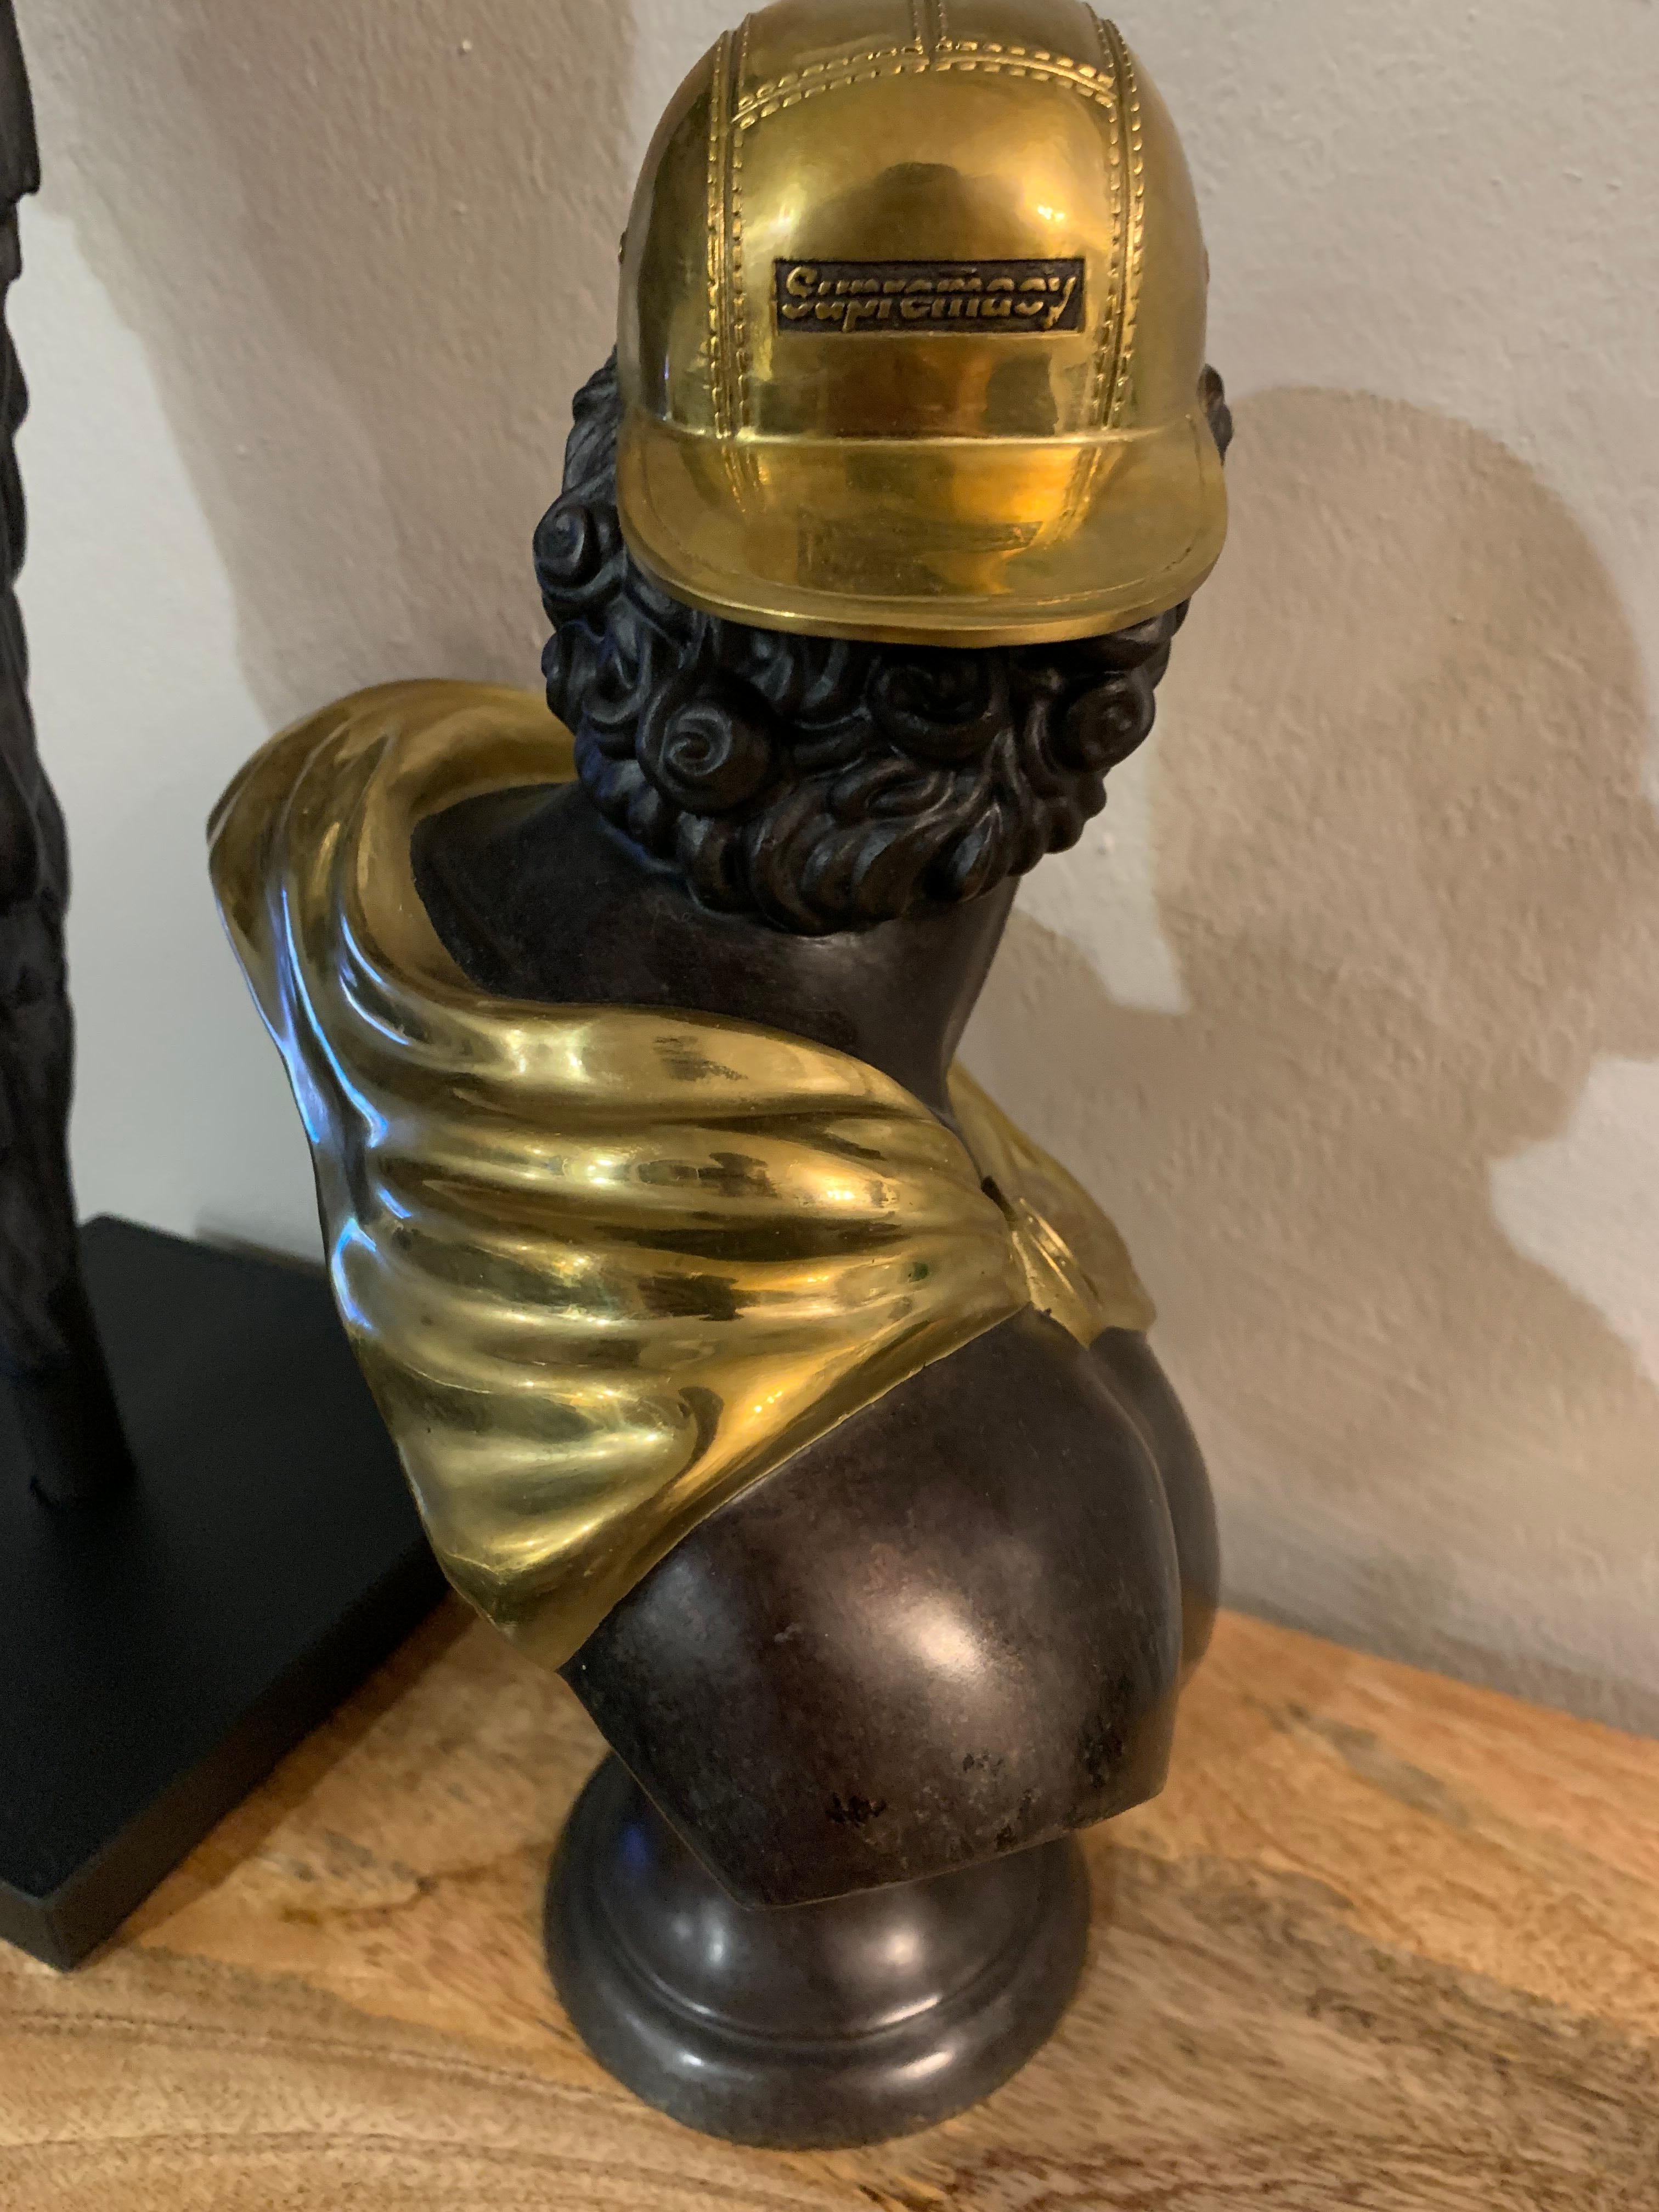 The Forgeworked Anti Supremacy (The Legacy) bronze edition of Abell Octovan’s urban-meets-classical rebellious piece celebrates its ancient inspiration through the use of the traditional statue material popularized by the Greeks and Romans. The gold